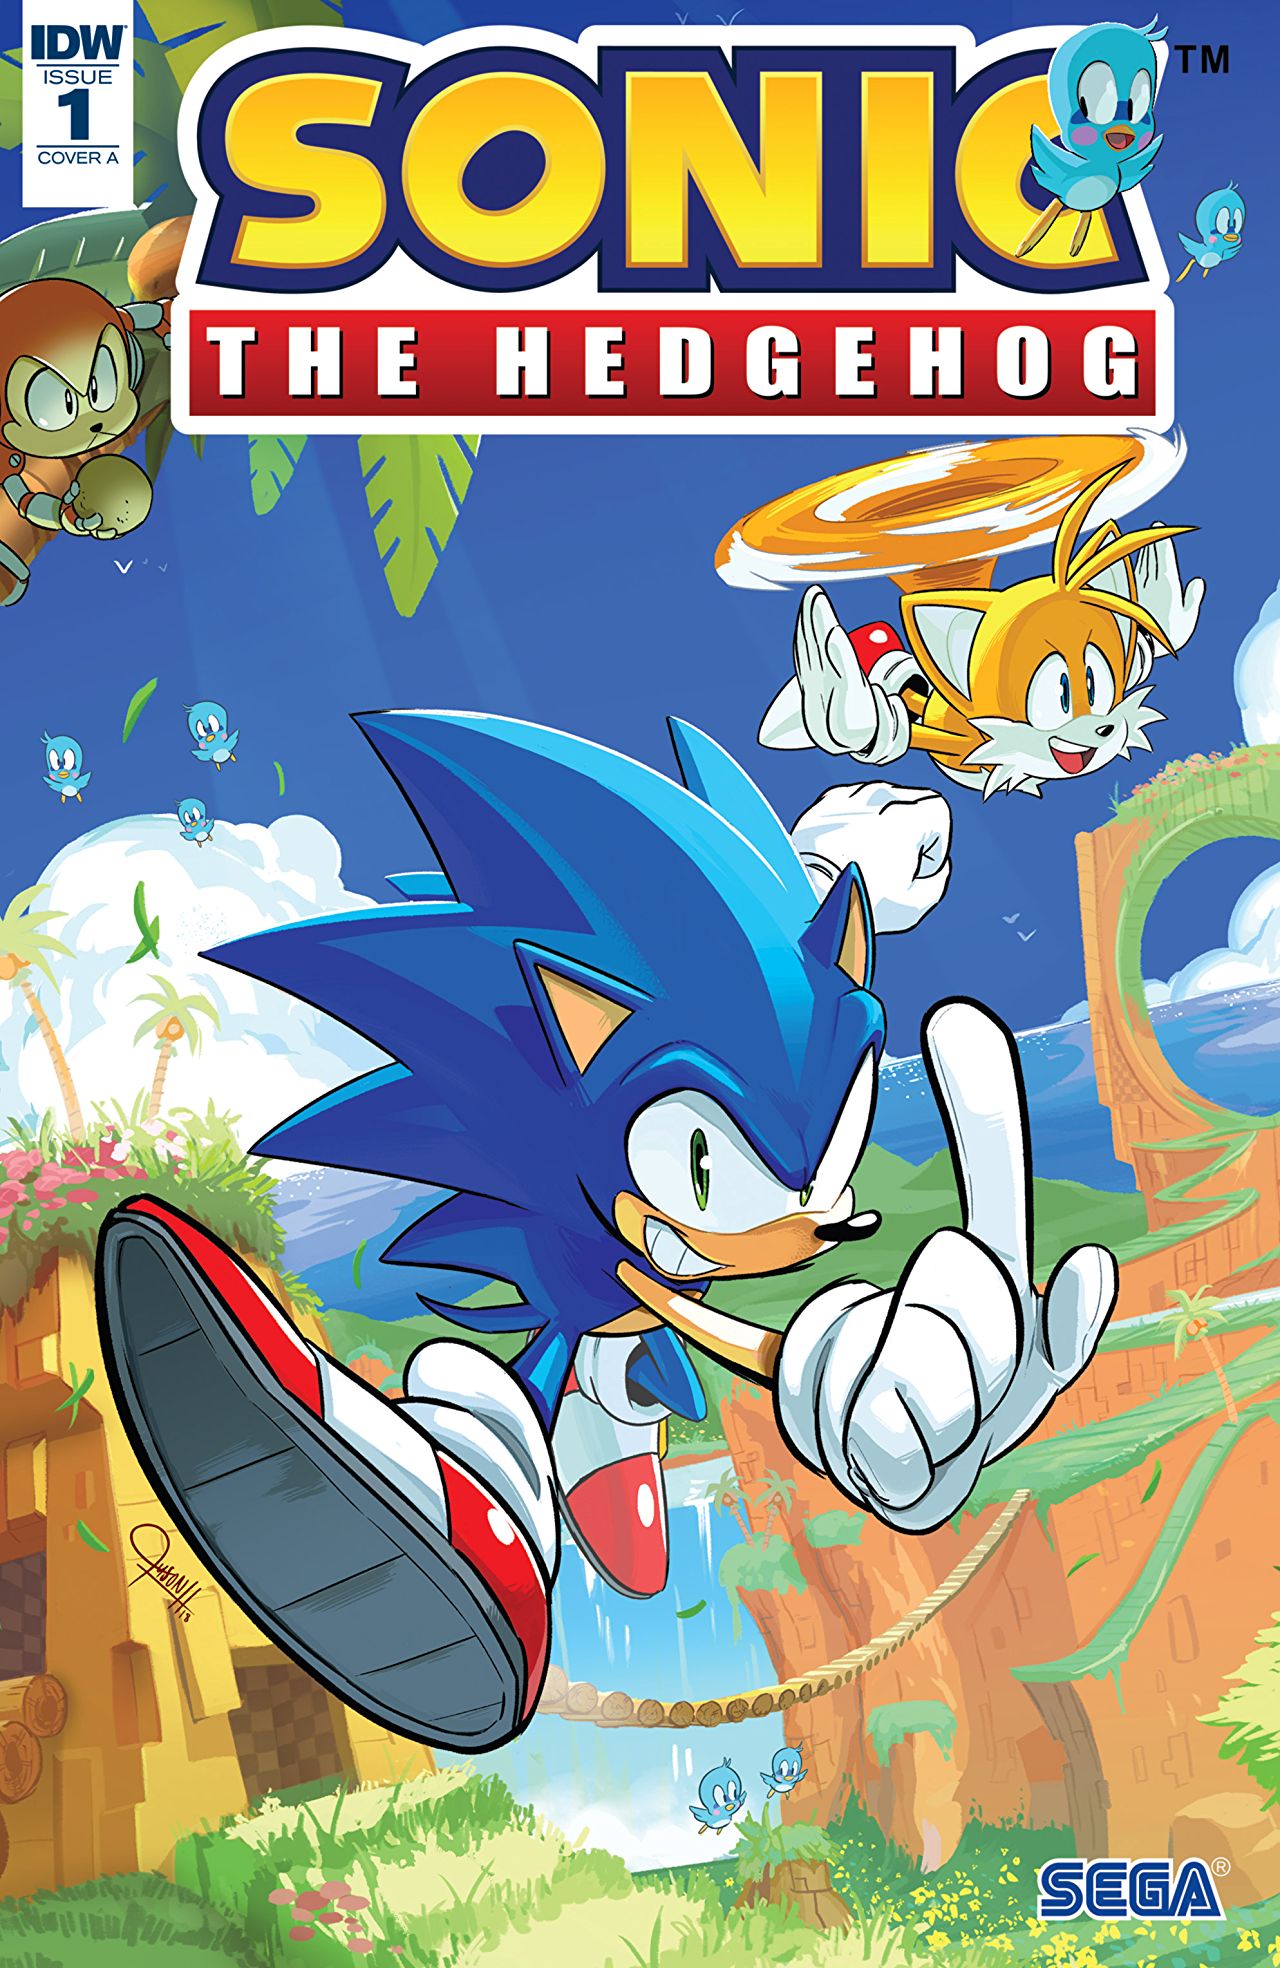 Sonic the Hedgehog #1 Review: IDW's new series is a worthy successor | AIPT